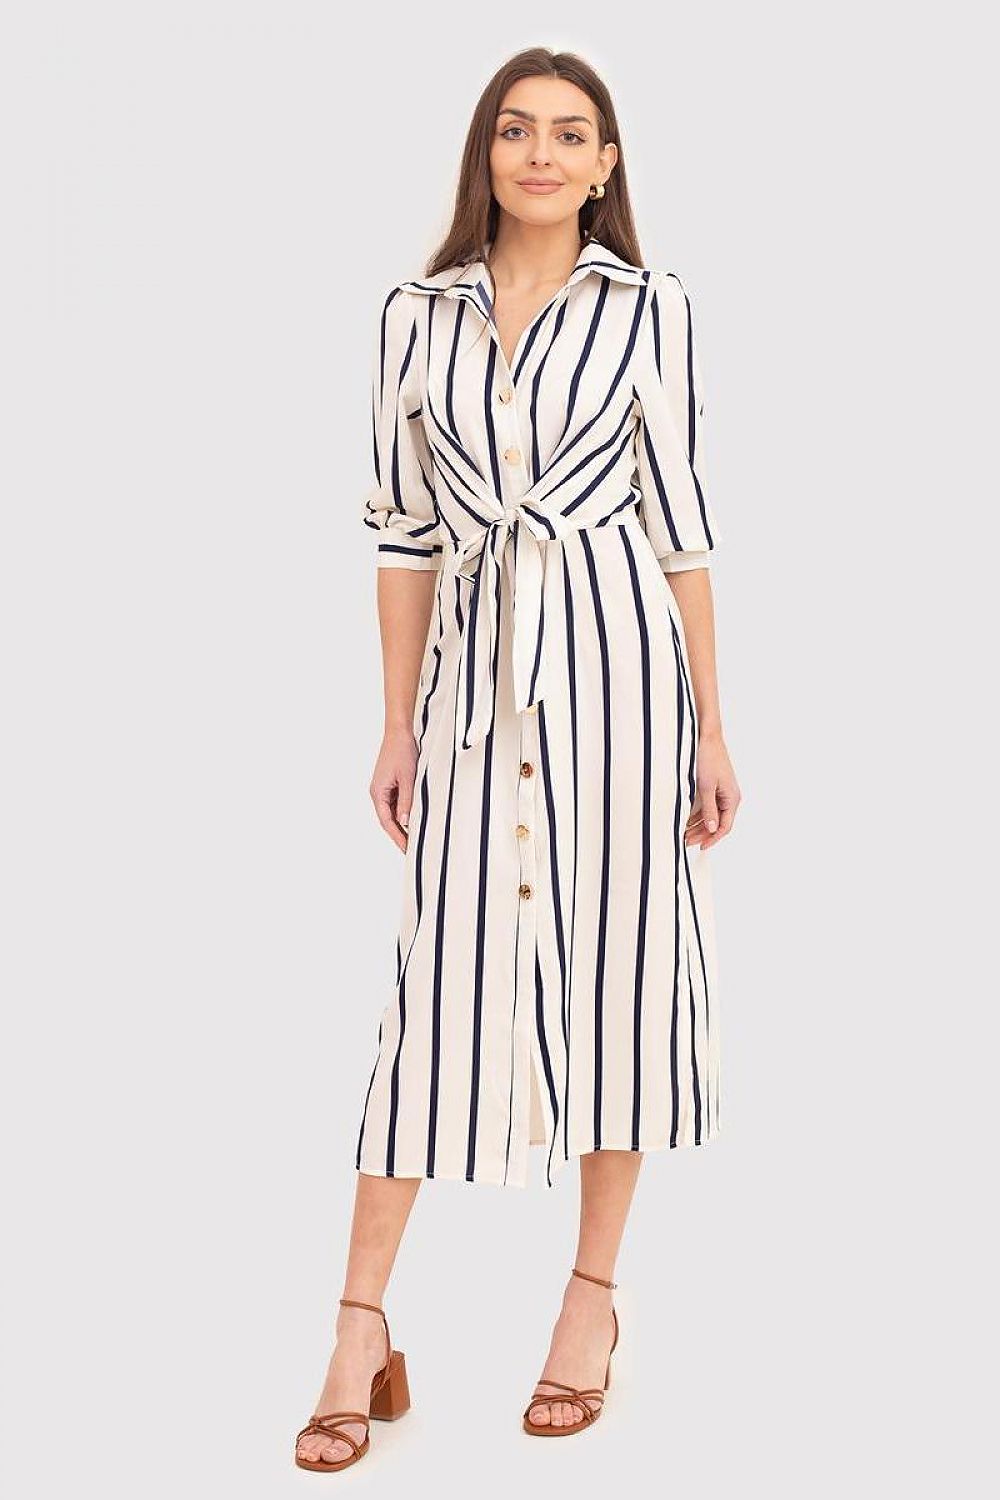 3/4 sleeves cream day dress with navy blue stripes